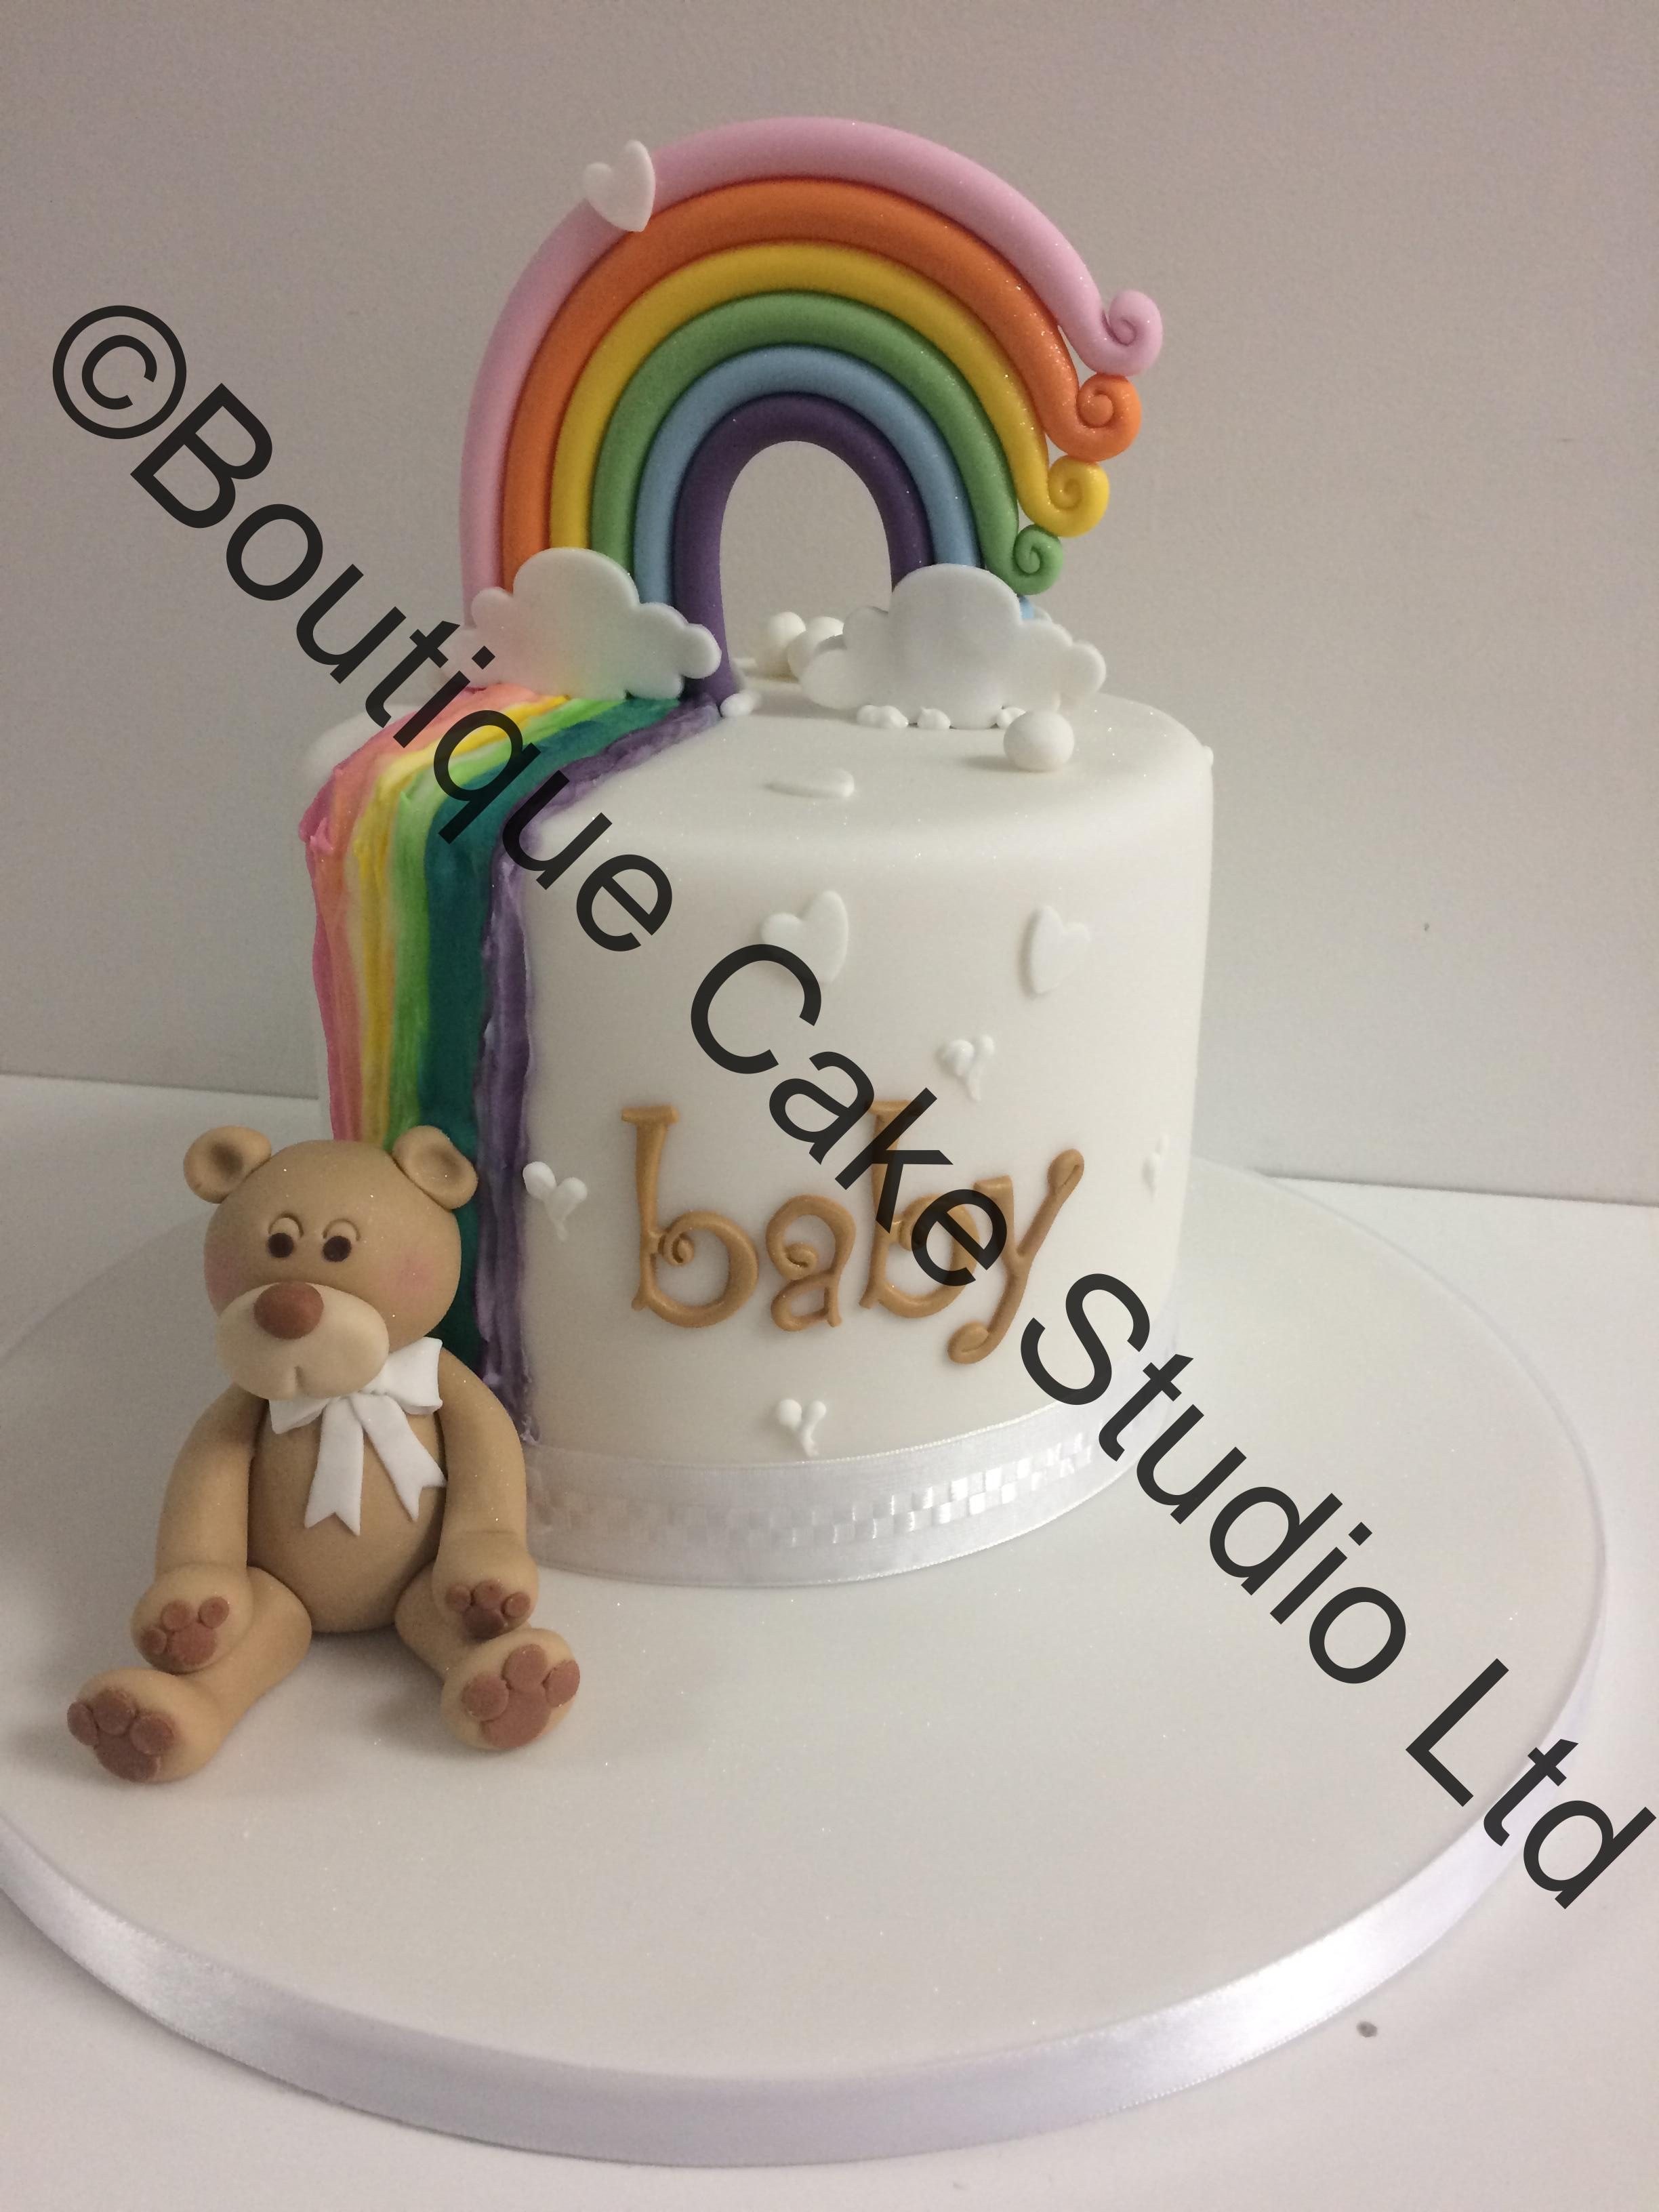 Extra Height Baby Shower Cake with Rainbow and Teddy